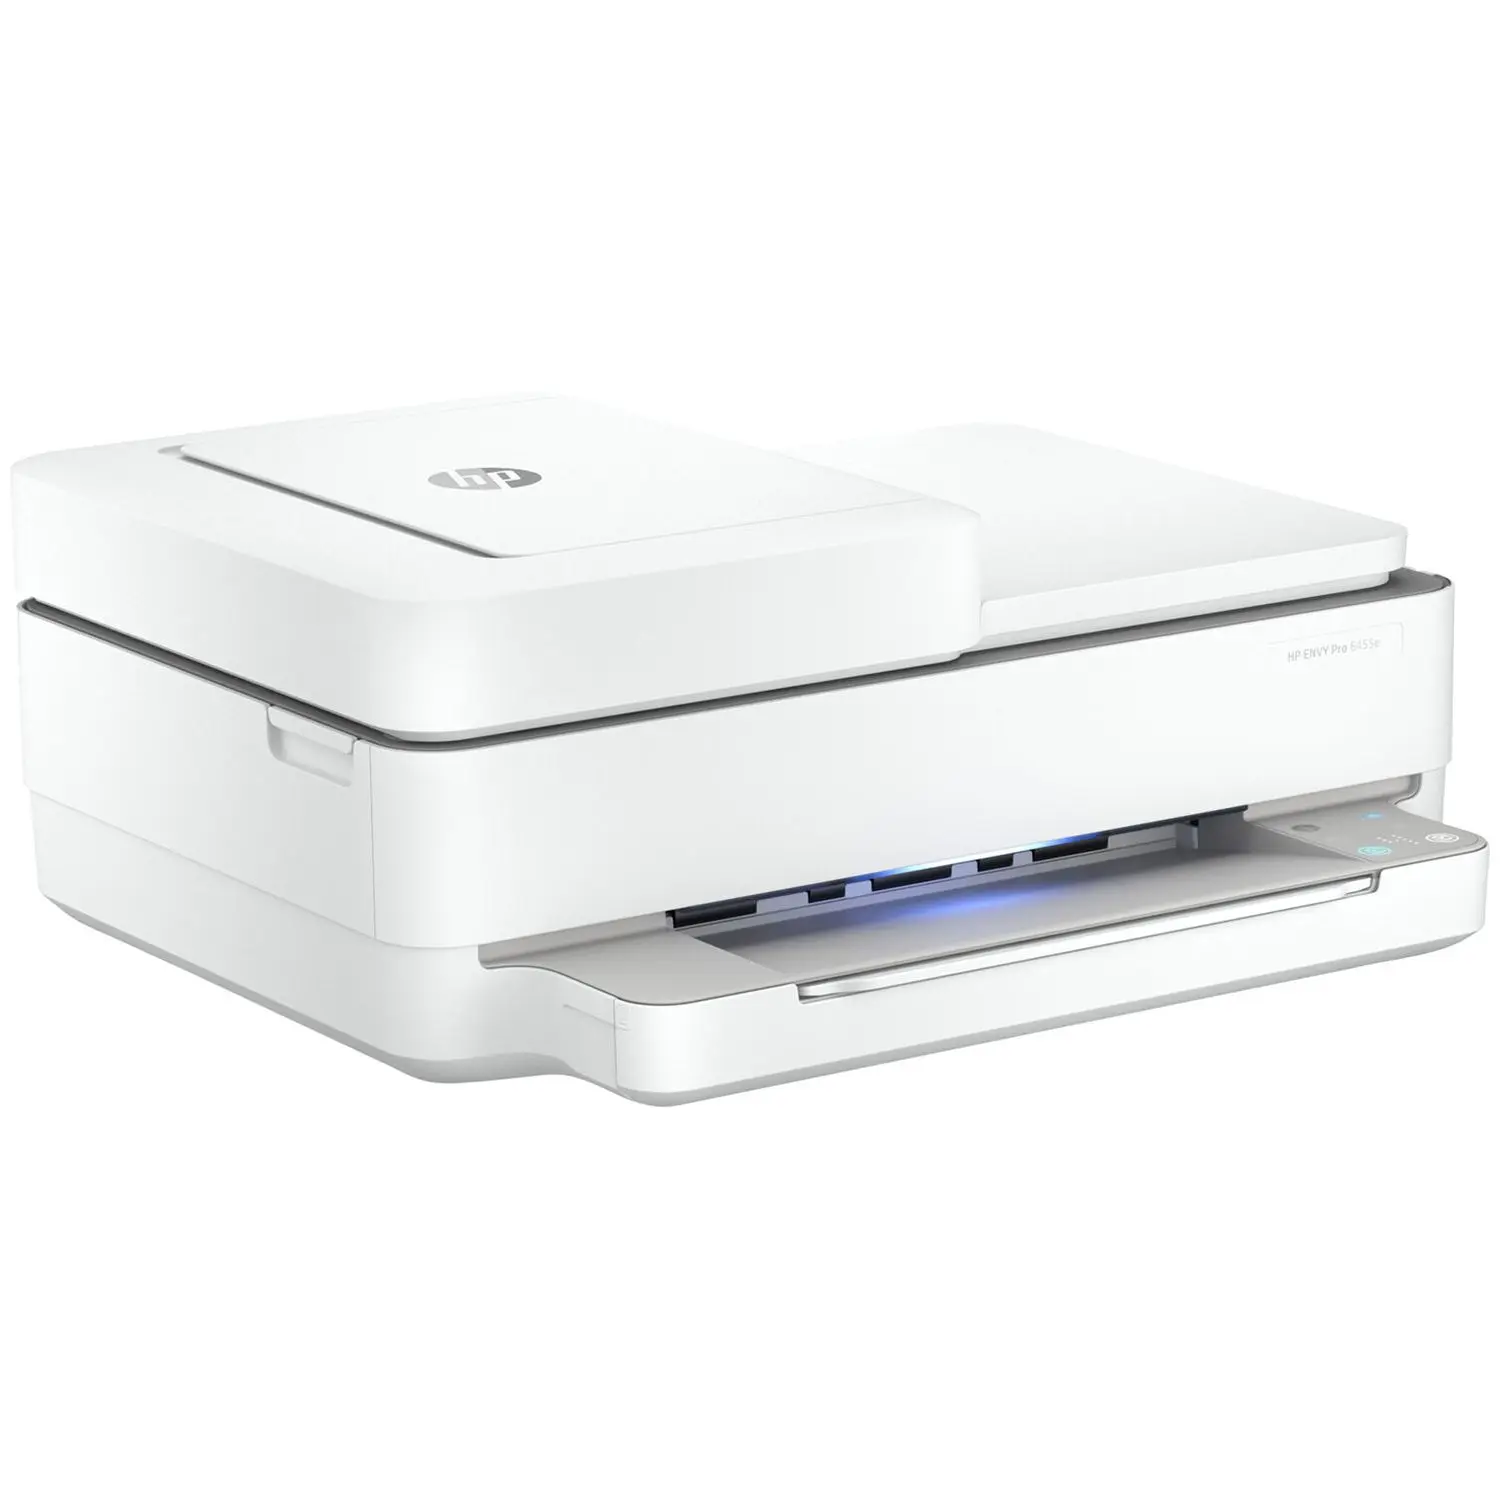 Introducing the hp officejet 6400 all-in-one printer: versatile and reliable